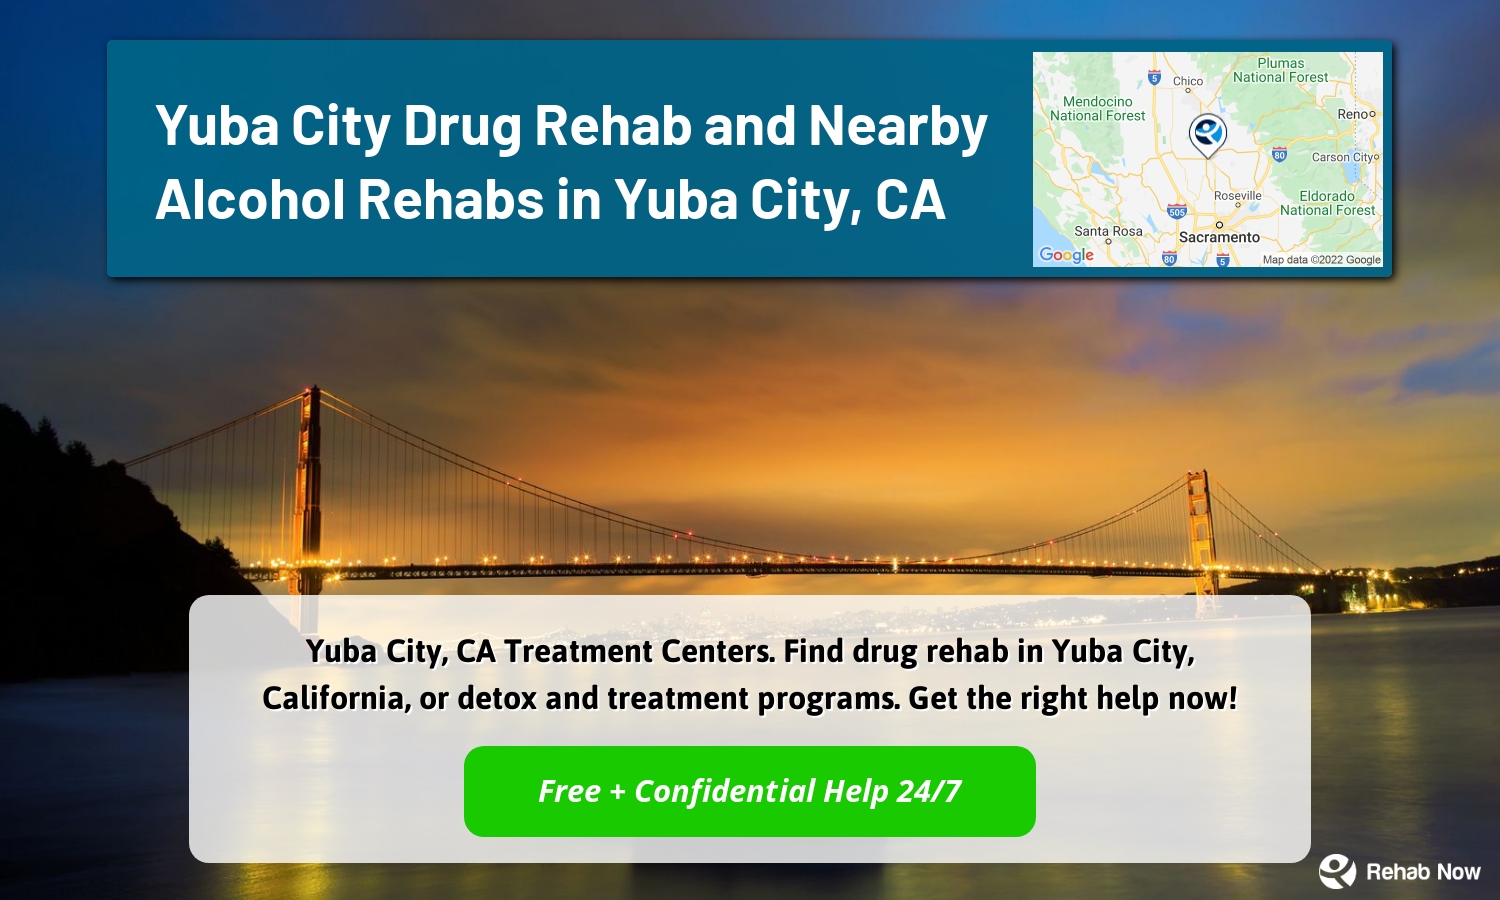 Yuba City, CA Treatment Centers. Find drug rehab in Yuba City, California, or detox and treatment programs. Get the right help now!